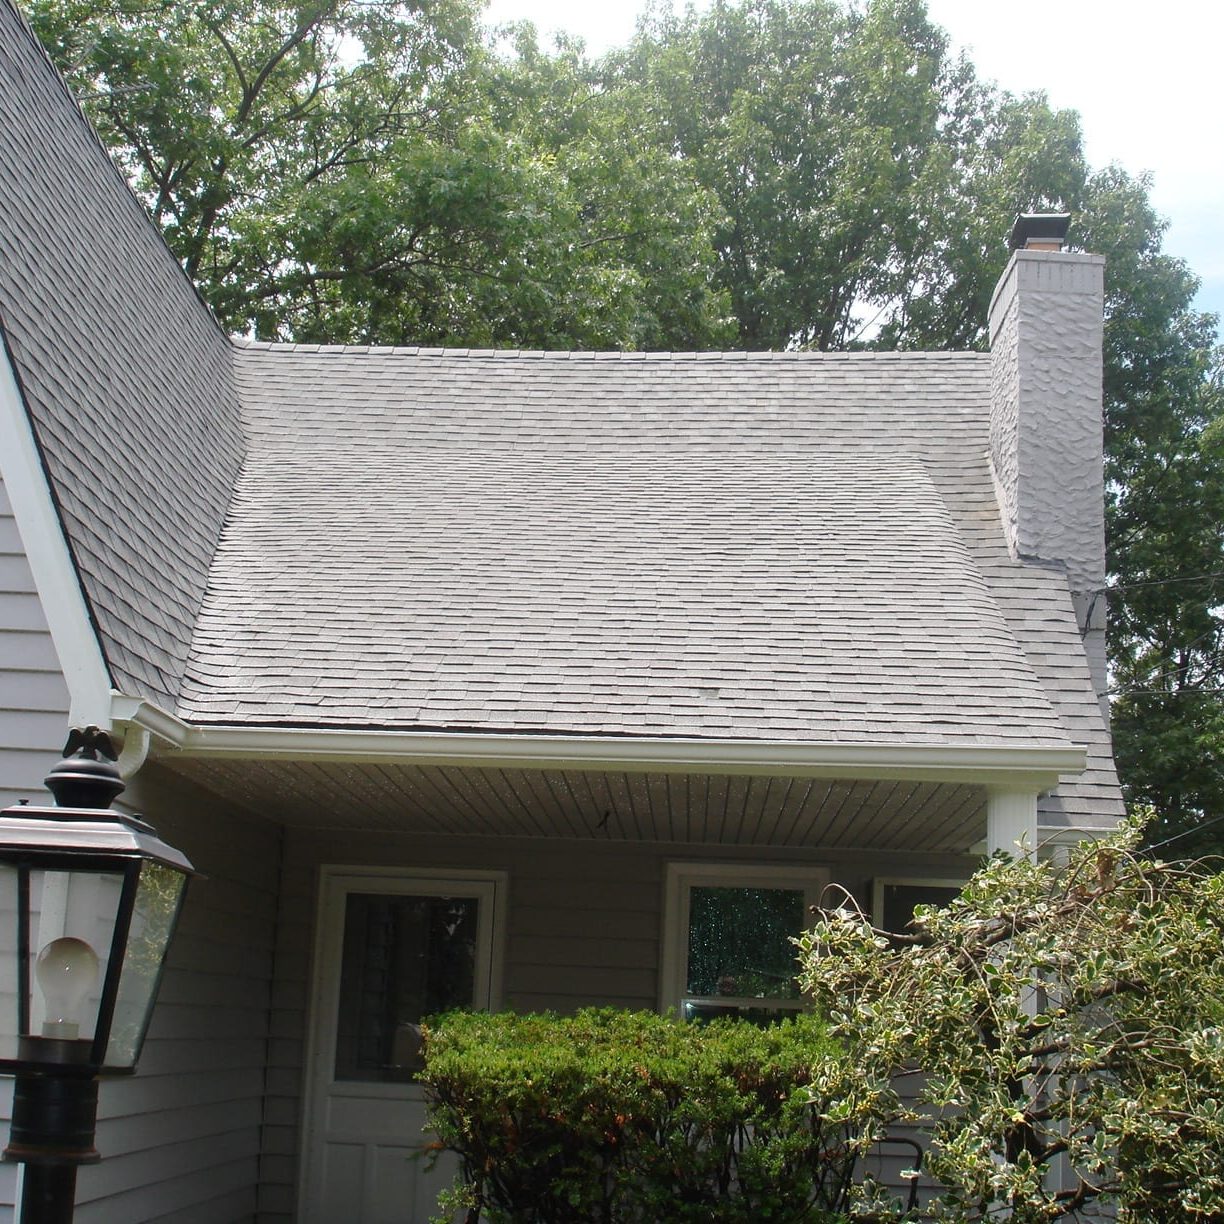 SoftWash Low Pressure Roof Cleaning Don’t replace your roof — restore it instead! Clean County provides professional roof cleaning services that protect the long life, curb appeal, and quality of your shingles. A Solution For Black Stains If you live in the Tri State area, it’s likely that you’ve run into the “black stain” issue on roofs. Many homes in the area have dark striped running down their shingles. The responsible party? A type of bacteria called Gloeocapsa Magma, which looks like algae and feeds on the limestone in your shingles. When Gloeocapsa Magma takes hold, it eats away at your roofing. This introduces issues like: